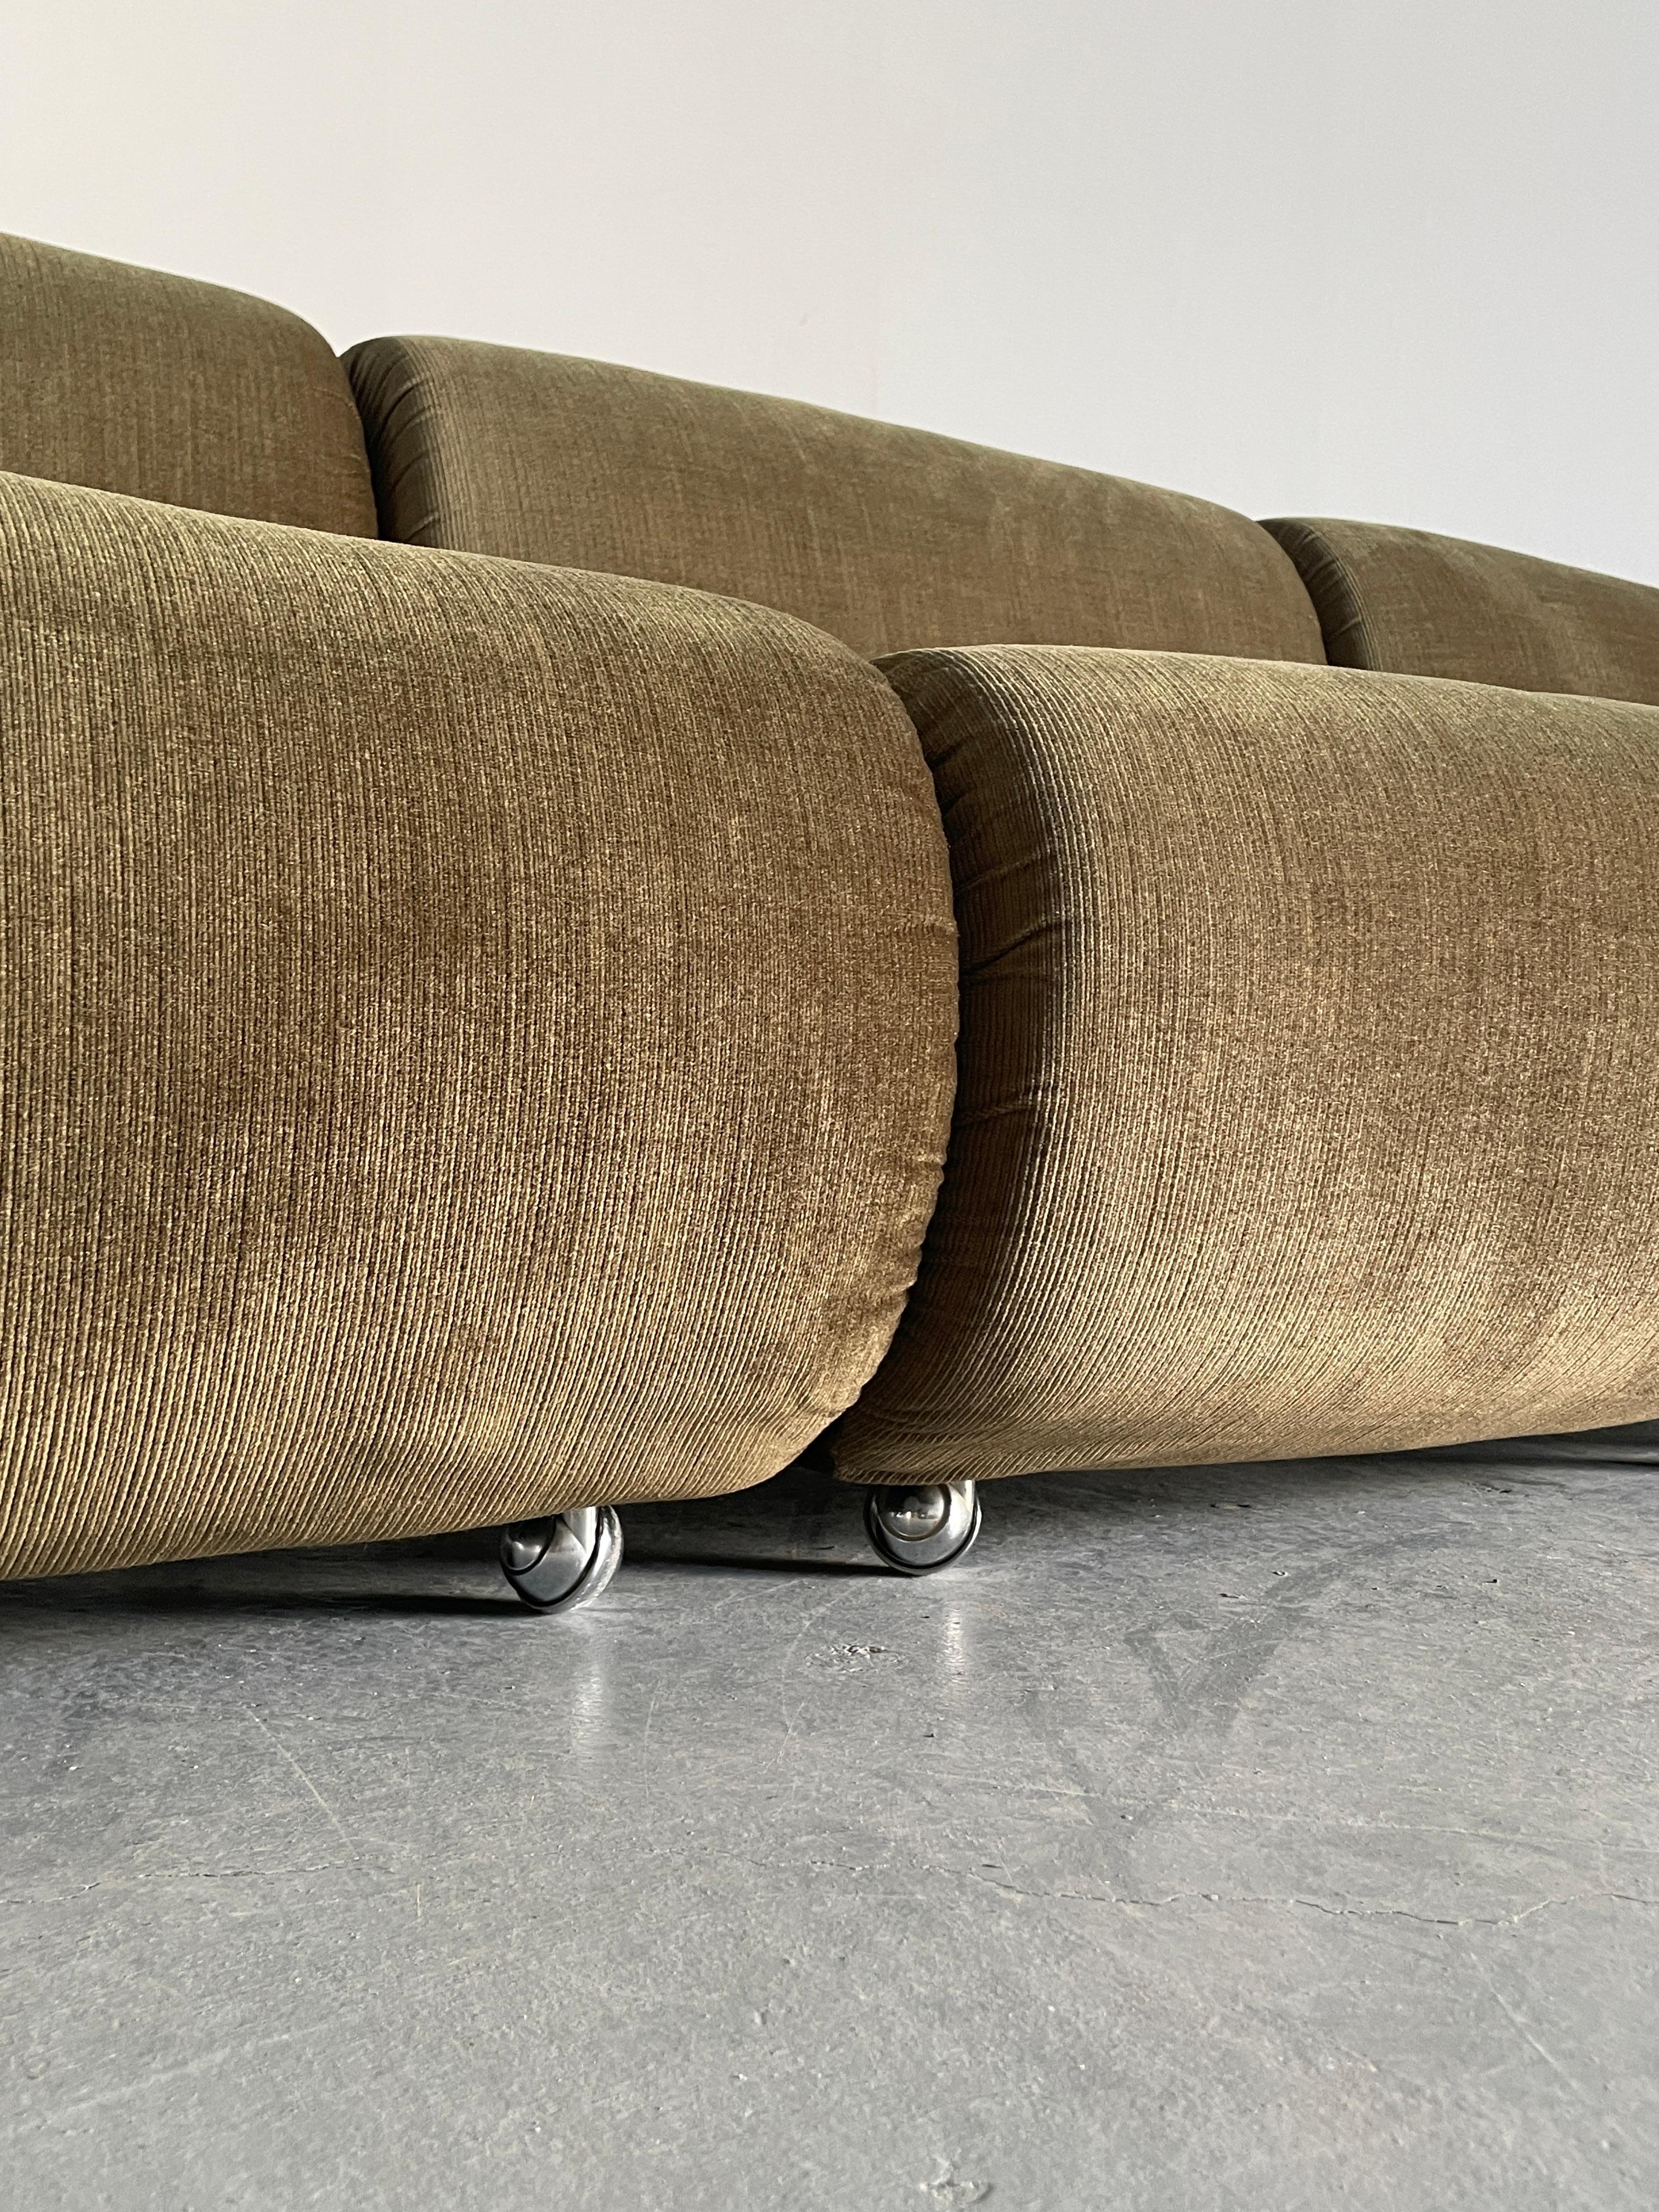 Italian Space Age Modular Seating Set in Striped Brown Fabric, Set of 4, 1970s 3